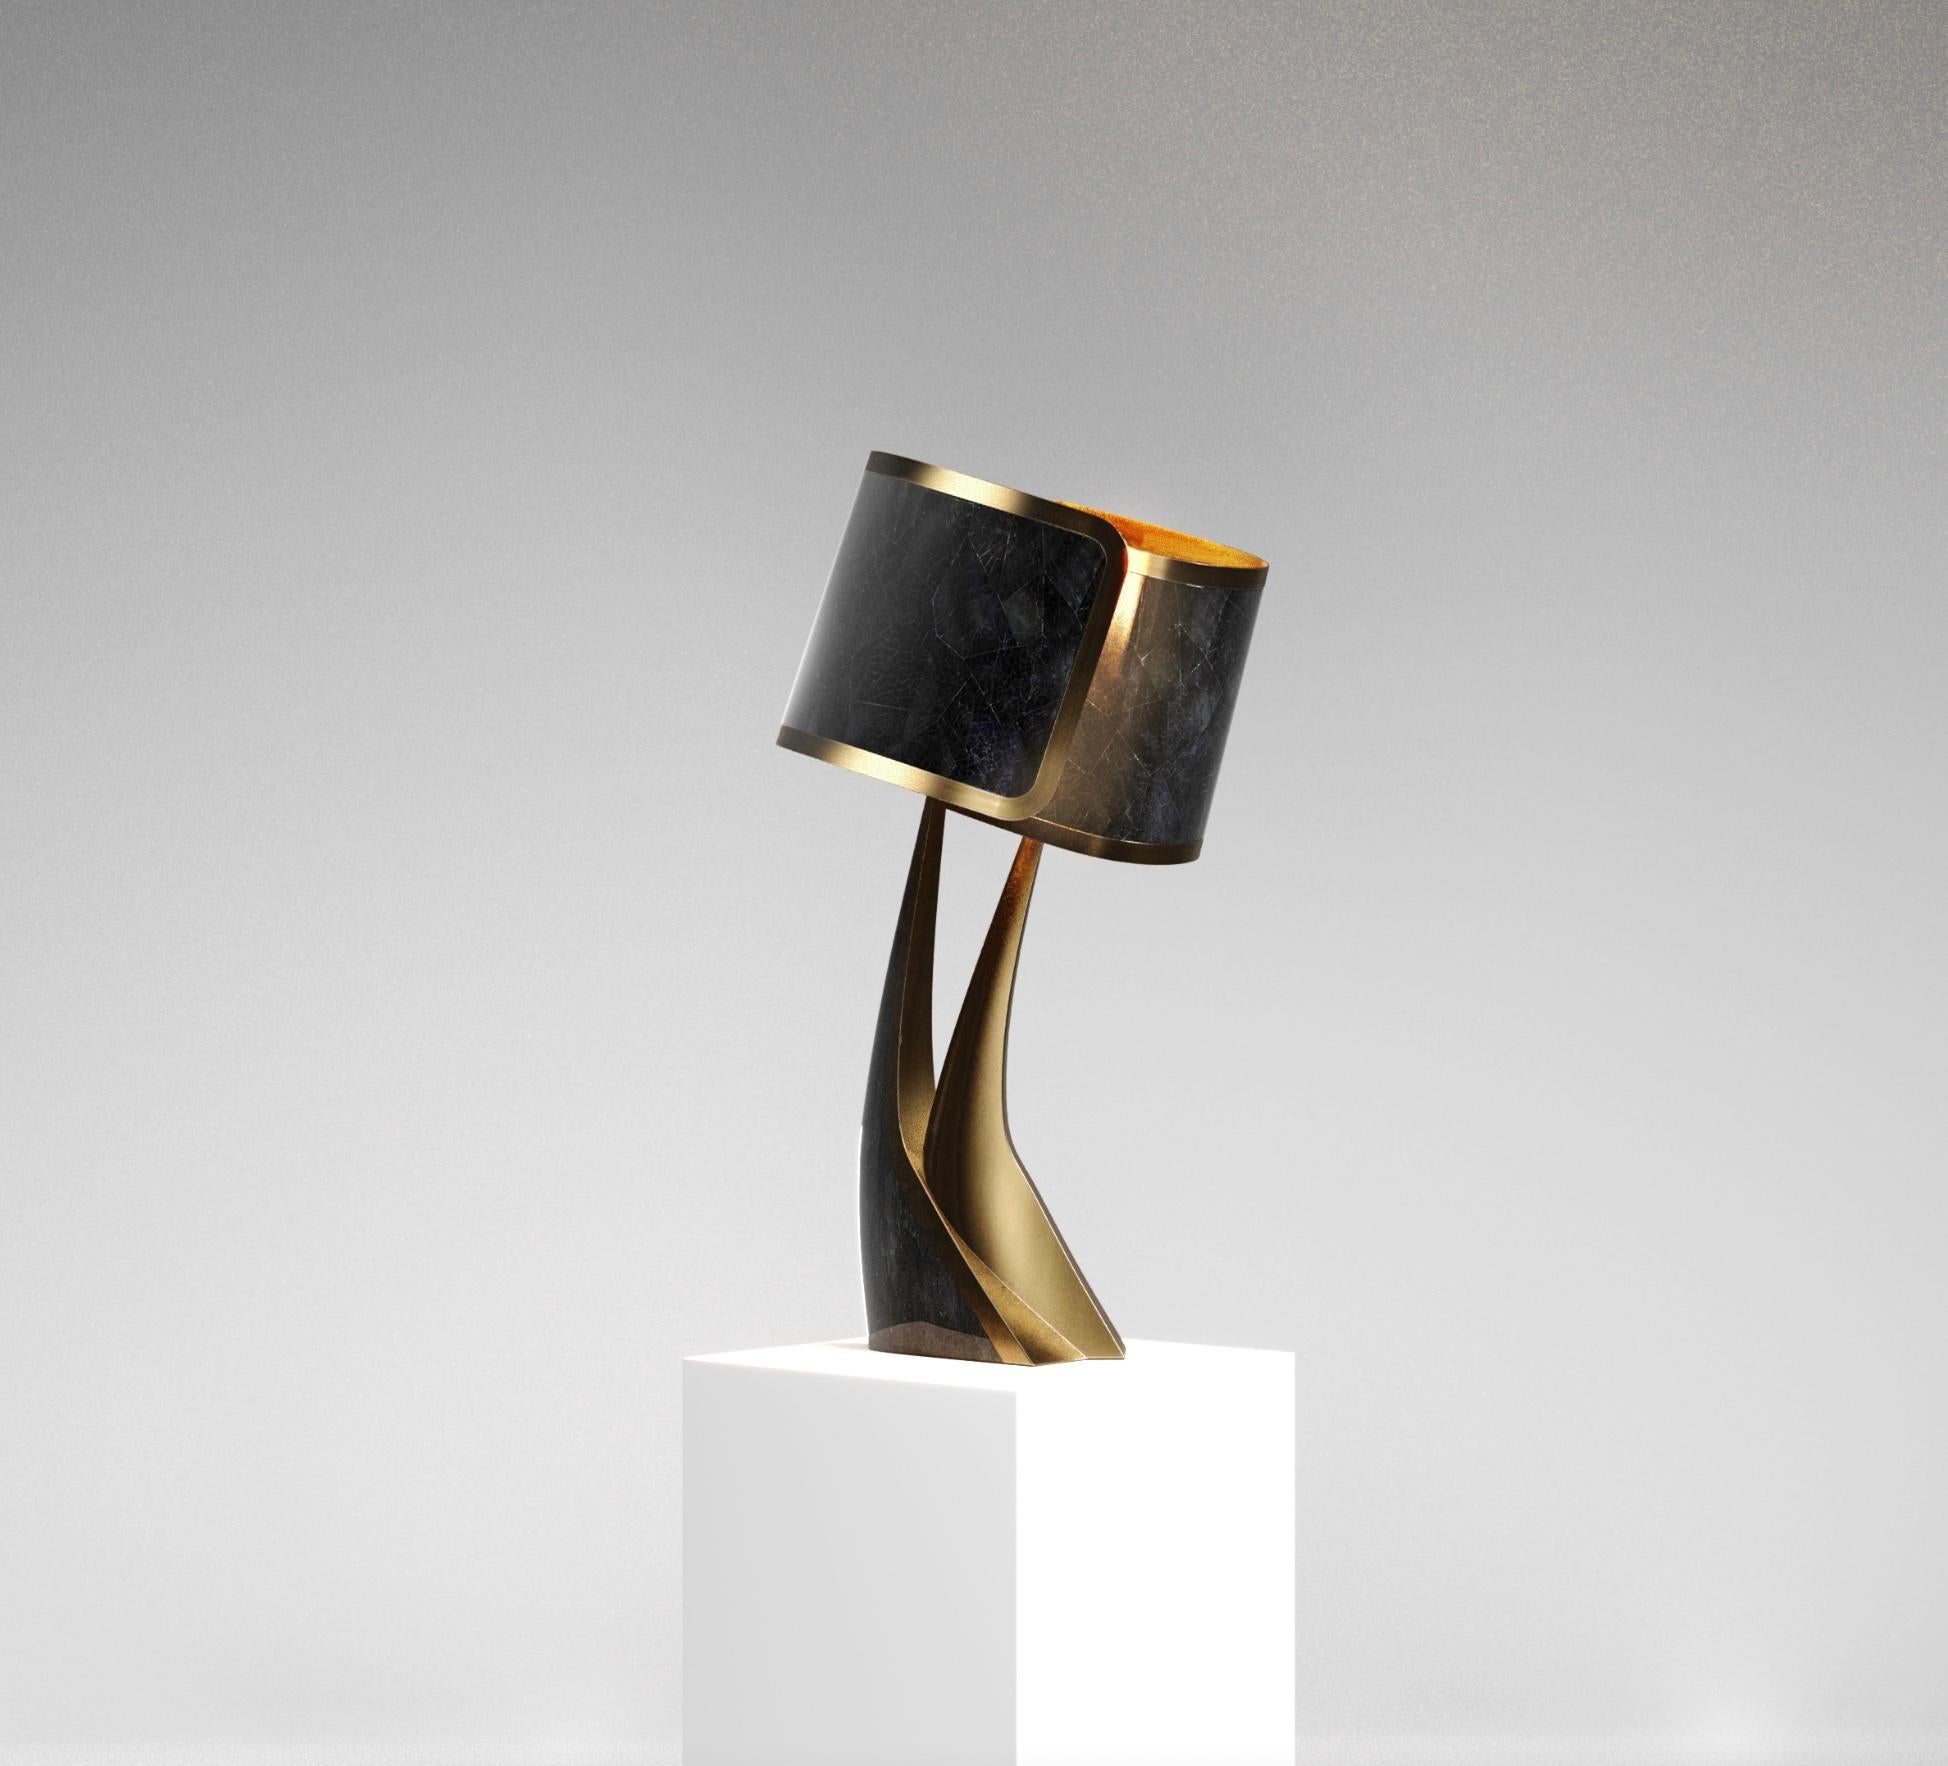 The Chital III Table Lamp by Kifu Paris is a sleek and sculptural piece, inlaid in a mixture of bronze-patina brass and black pen shell. The chiseled legs, which are an iconic shape within the KIFU PARIS universe, morph into the solid shades that